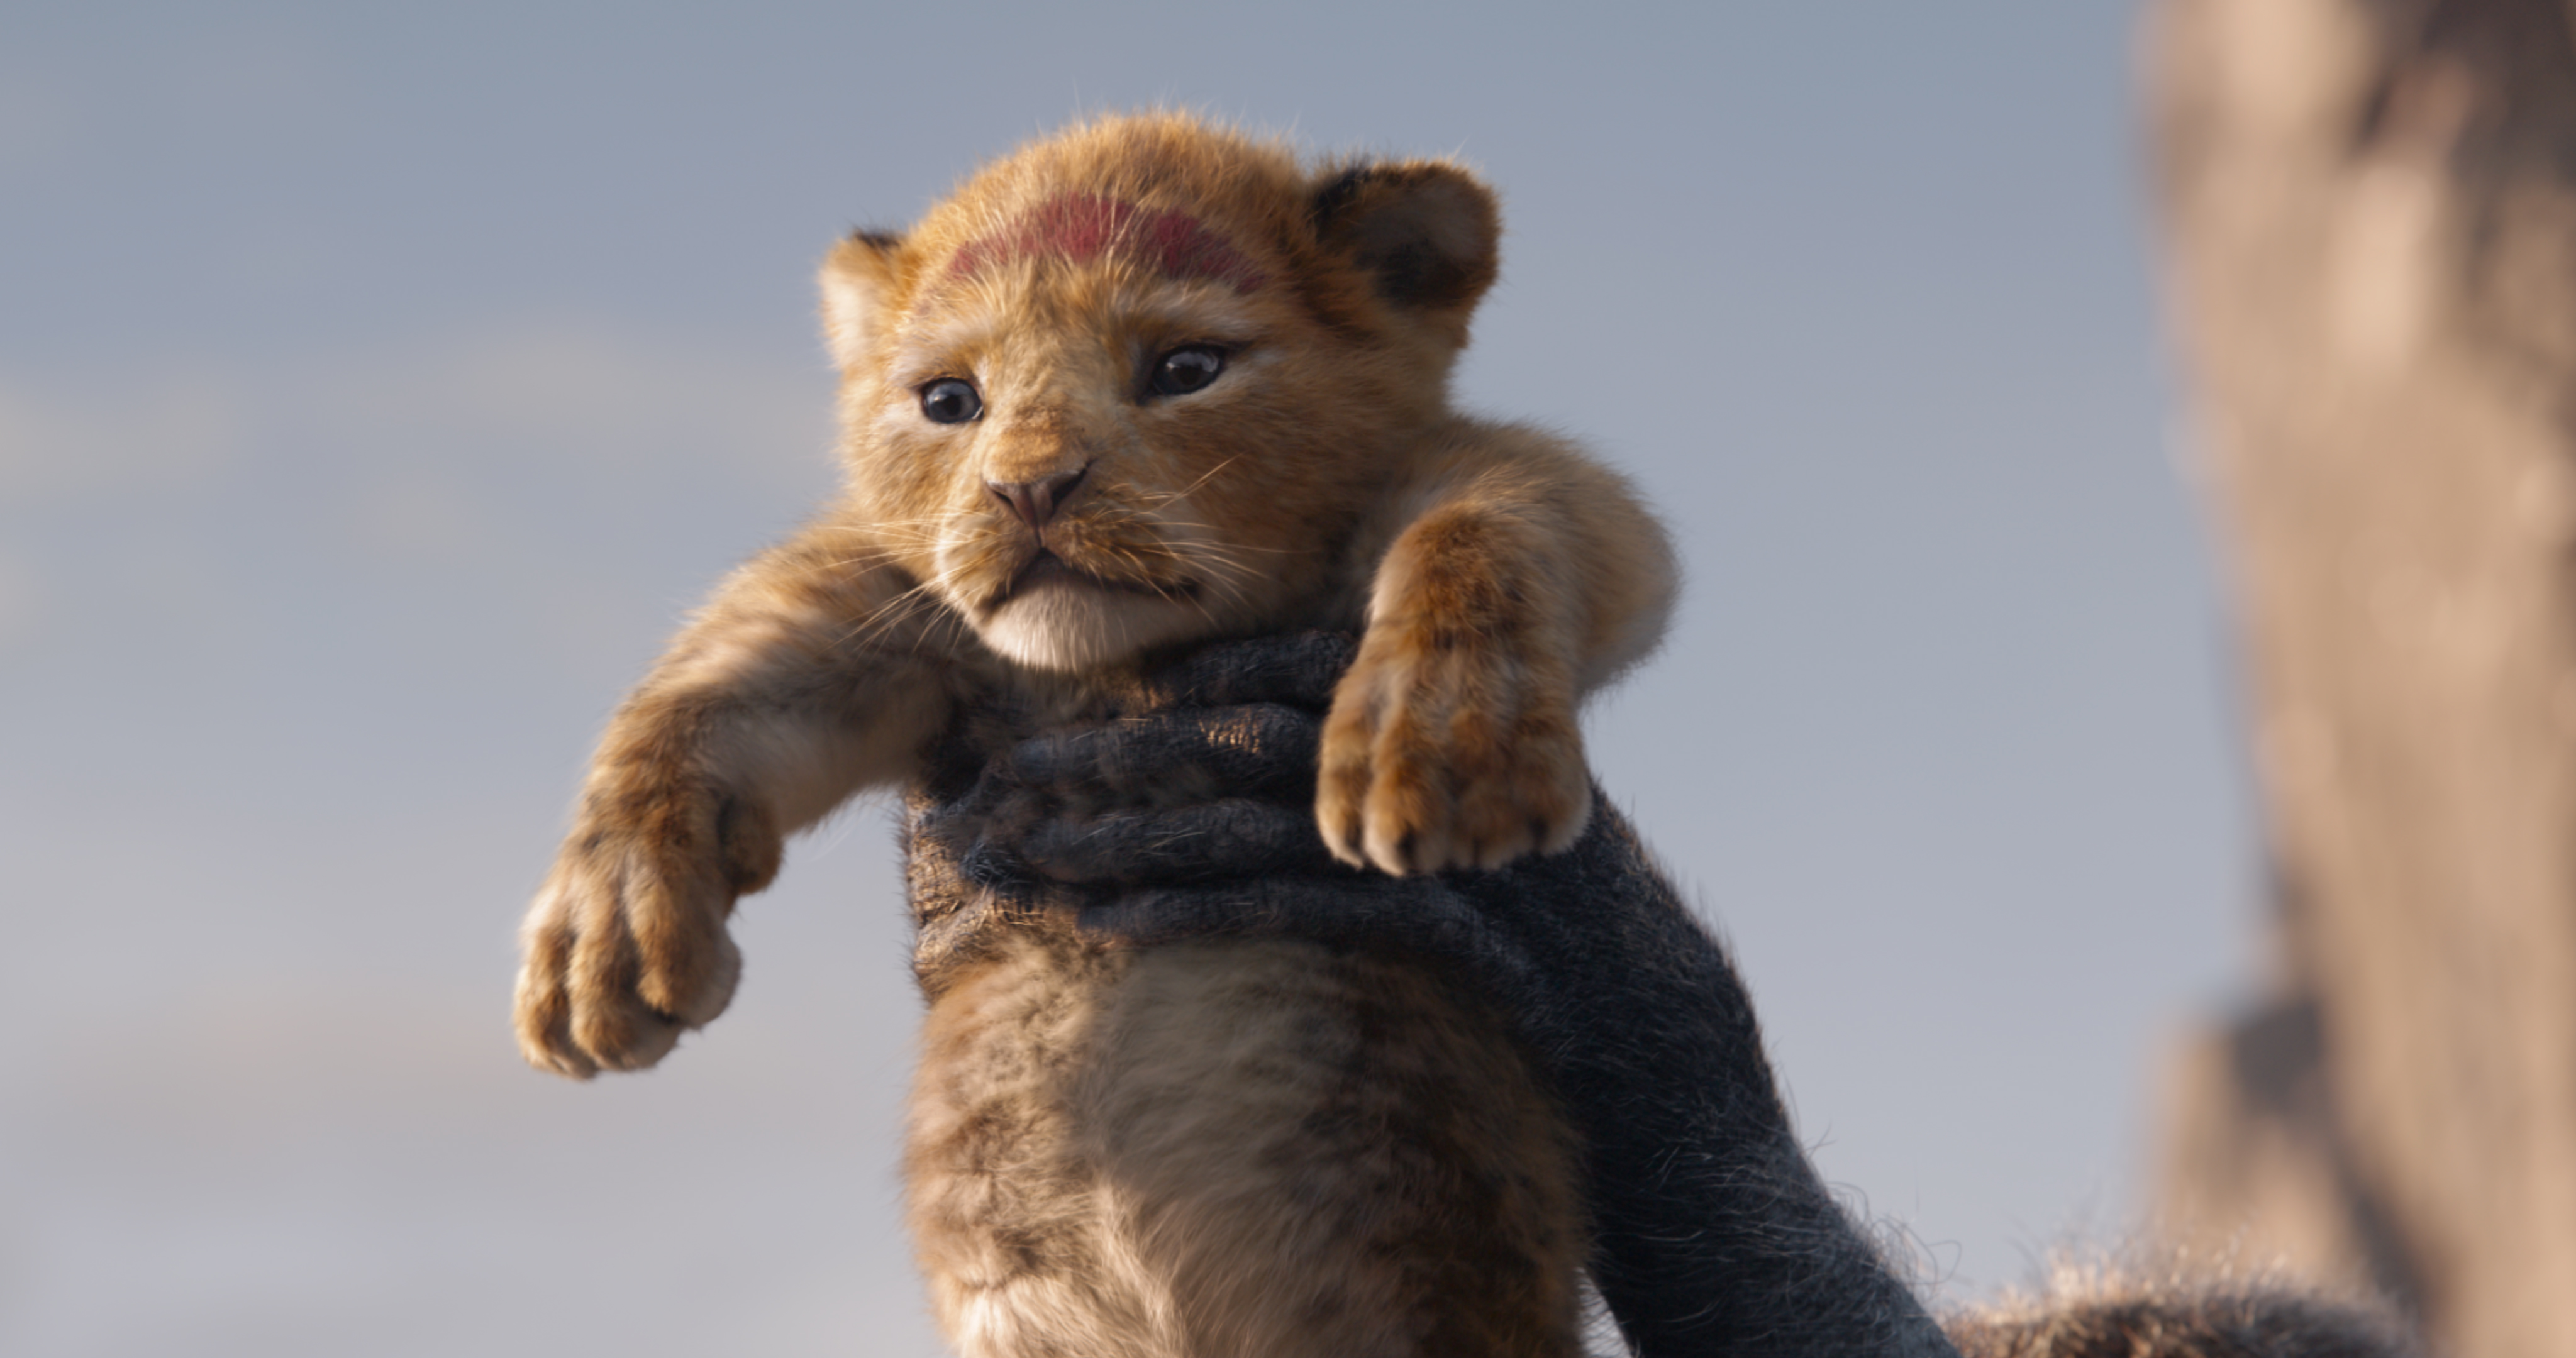 In Disney’s all-new “The Lion King,” Simba idolizes his father, King Mufasa, and takes to heart his own royal destiny. (null—©2019 Disney Enterprises, Inc. All Rights Reserved.)